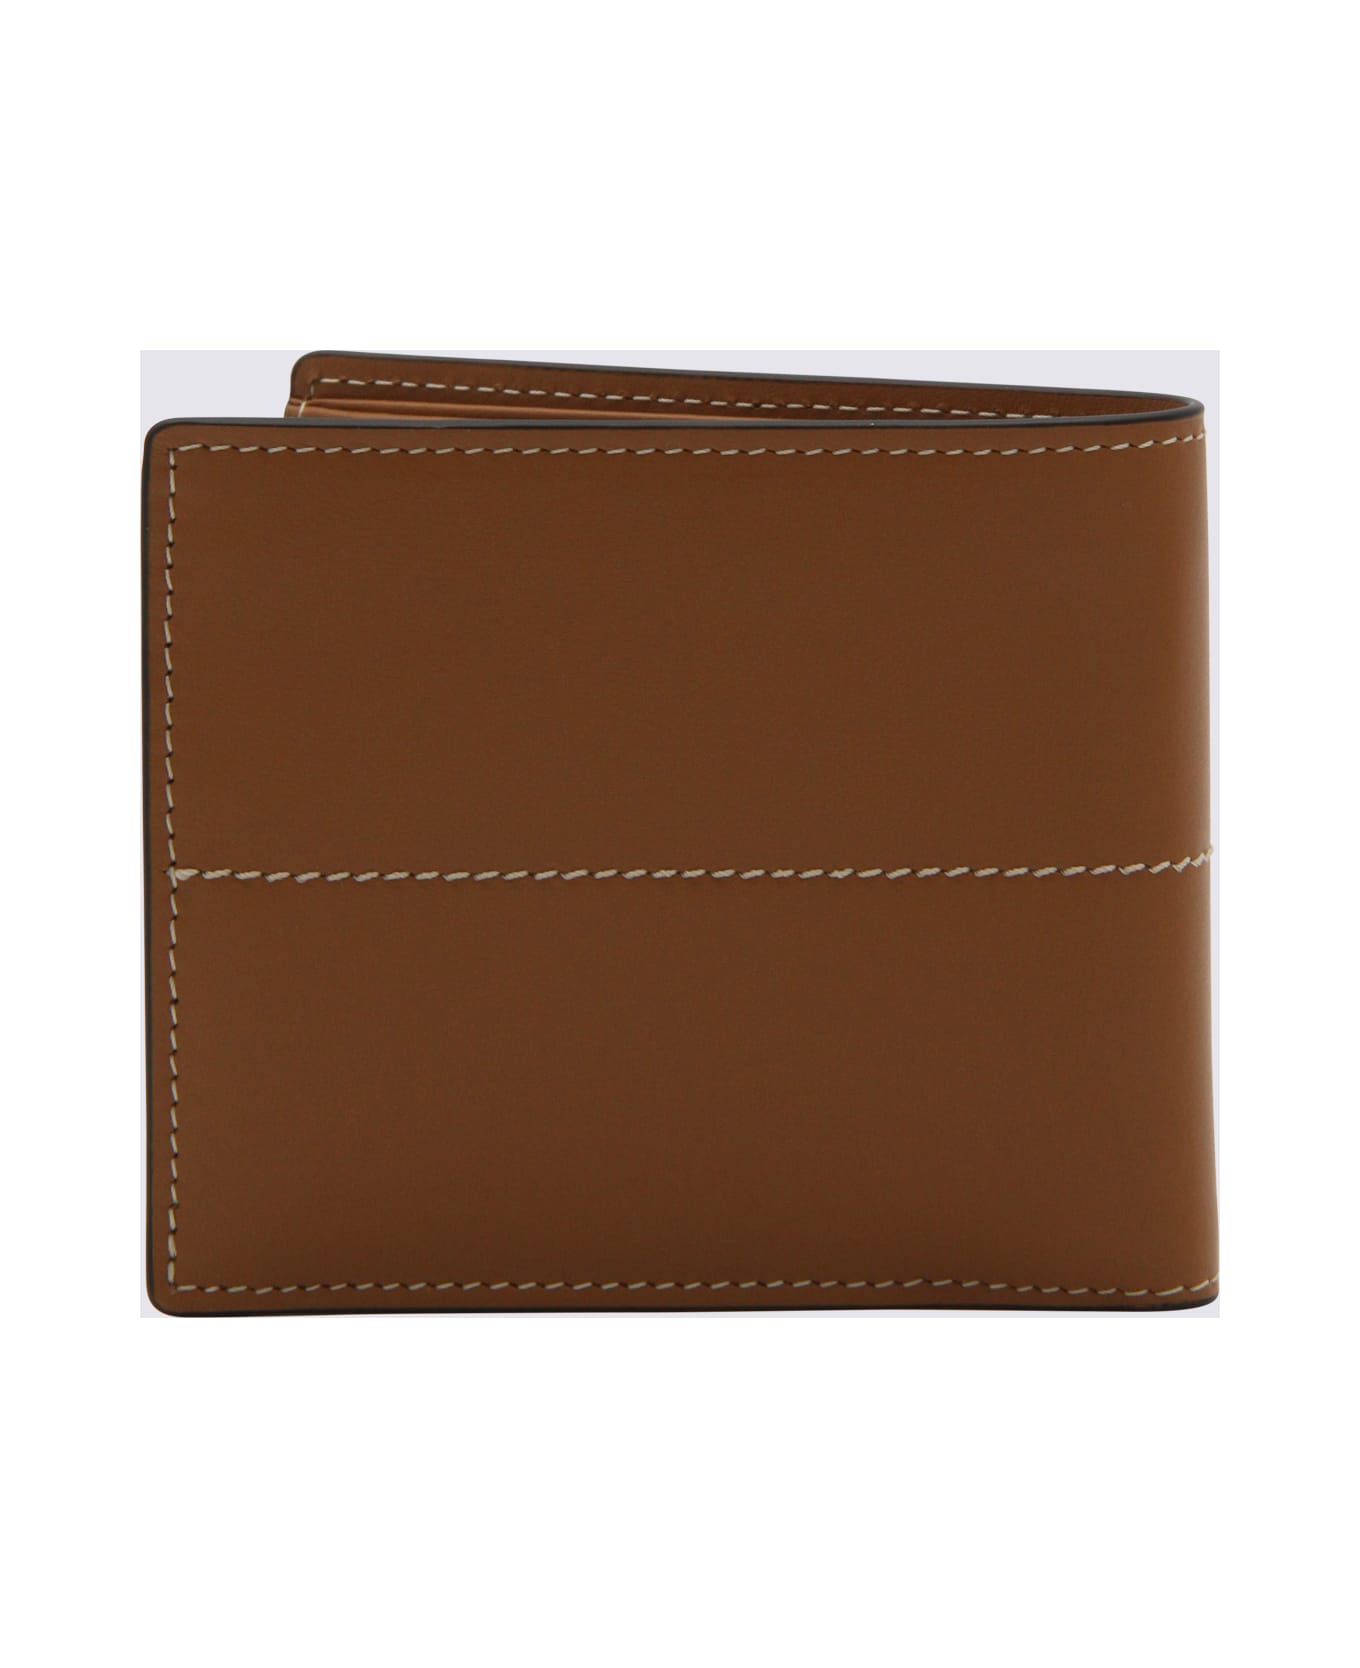 Tod's Brown Leather Wallet - KENIA SCURO 財布